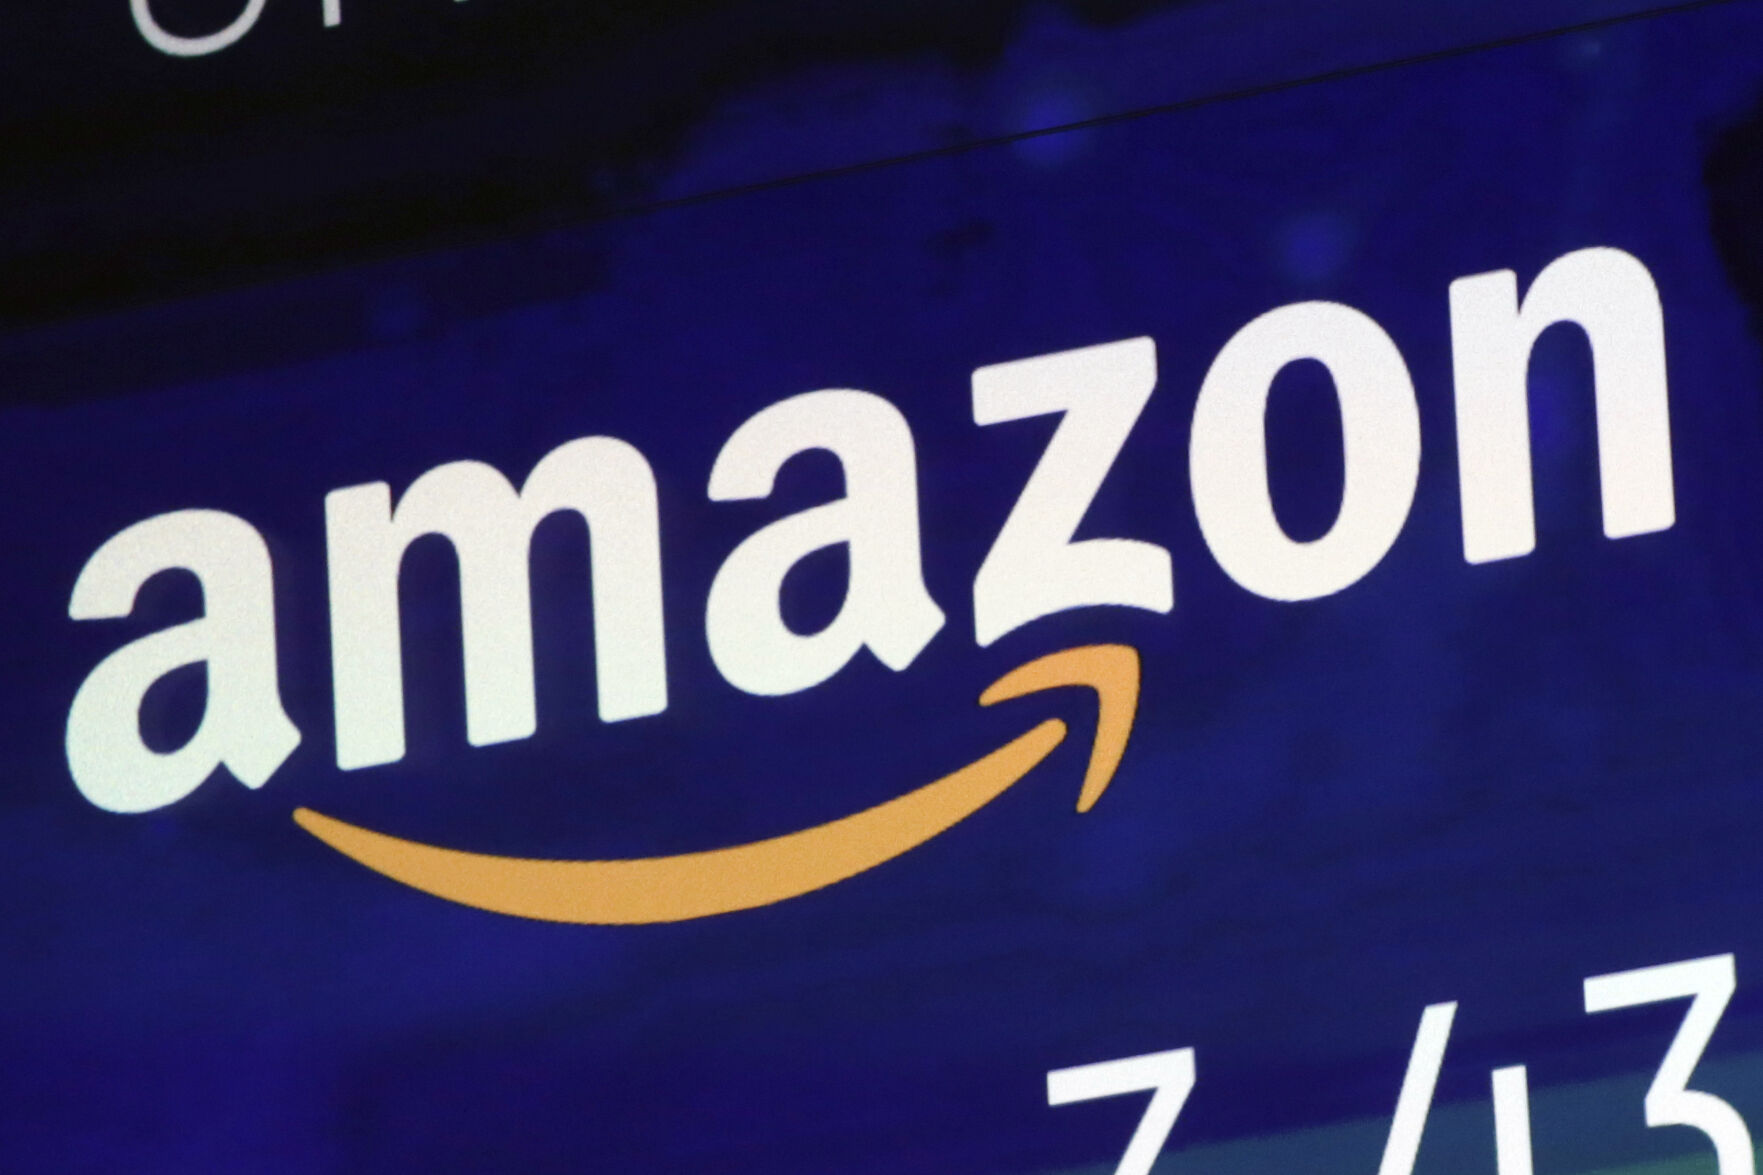 <p>FILE - The Amazon logo is displayed on a screen at the Nasdaq MarketSite, July 27, 2018. Amazon is stepping back into virtual care with a new service that uses secure messaging to connect patients with doctors for help with nearly two dozen conditions. The retail giant said Tuesday, Nov. 15, 2022, it will launch Amazon Clinic in 32 states to provide medication refills and care for conditions like allergies, erectile disfunction, hair loss, and urinary tract infections. (AP Photo/Richard Drew, File)</p>   PHOTO CREDIT: Richard Drew 